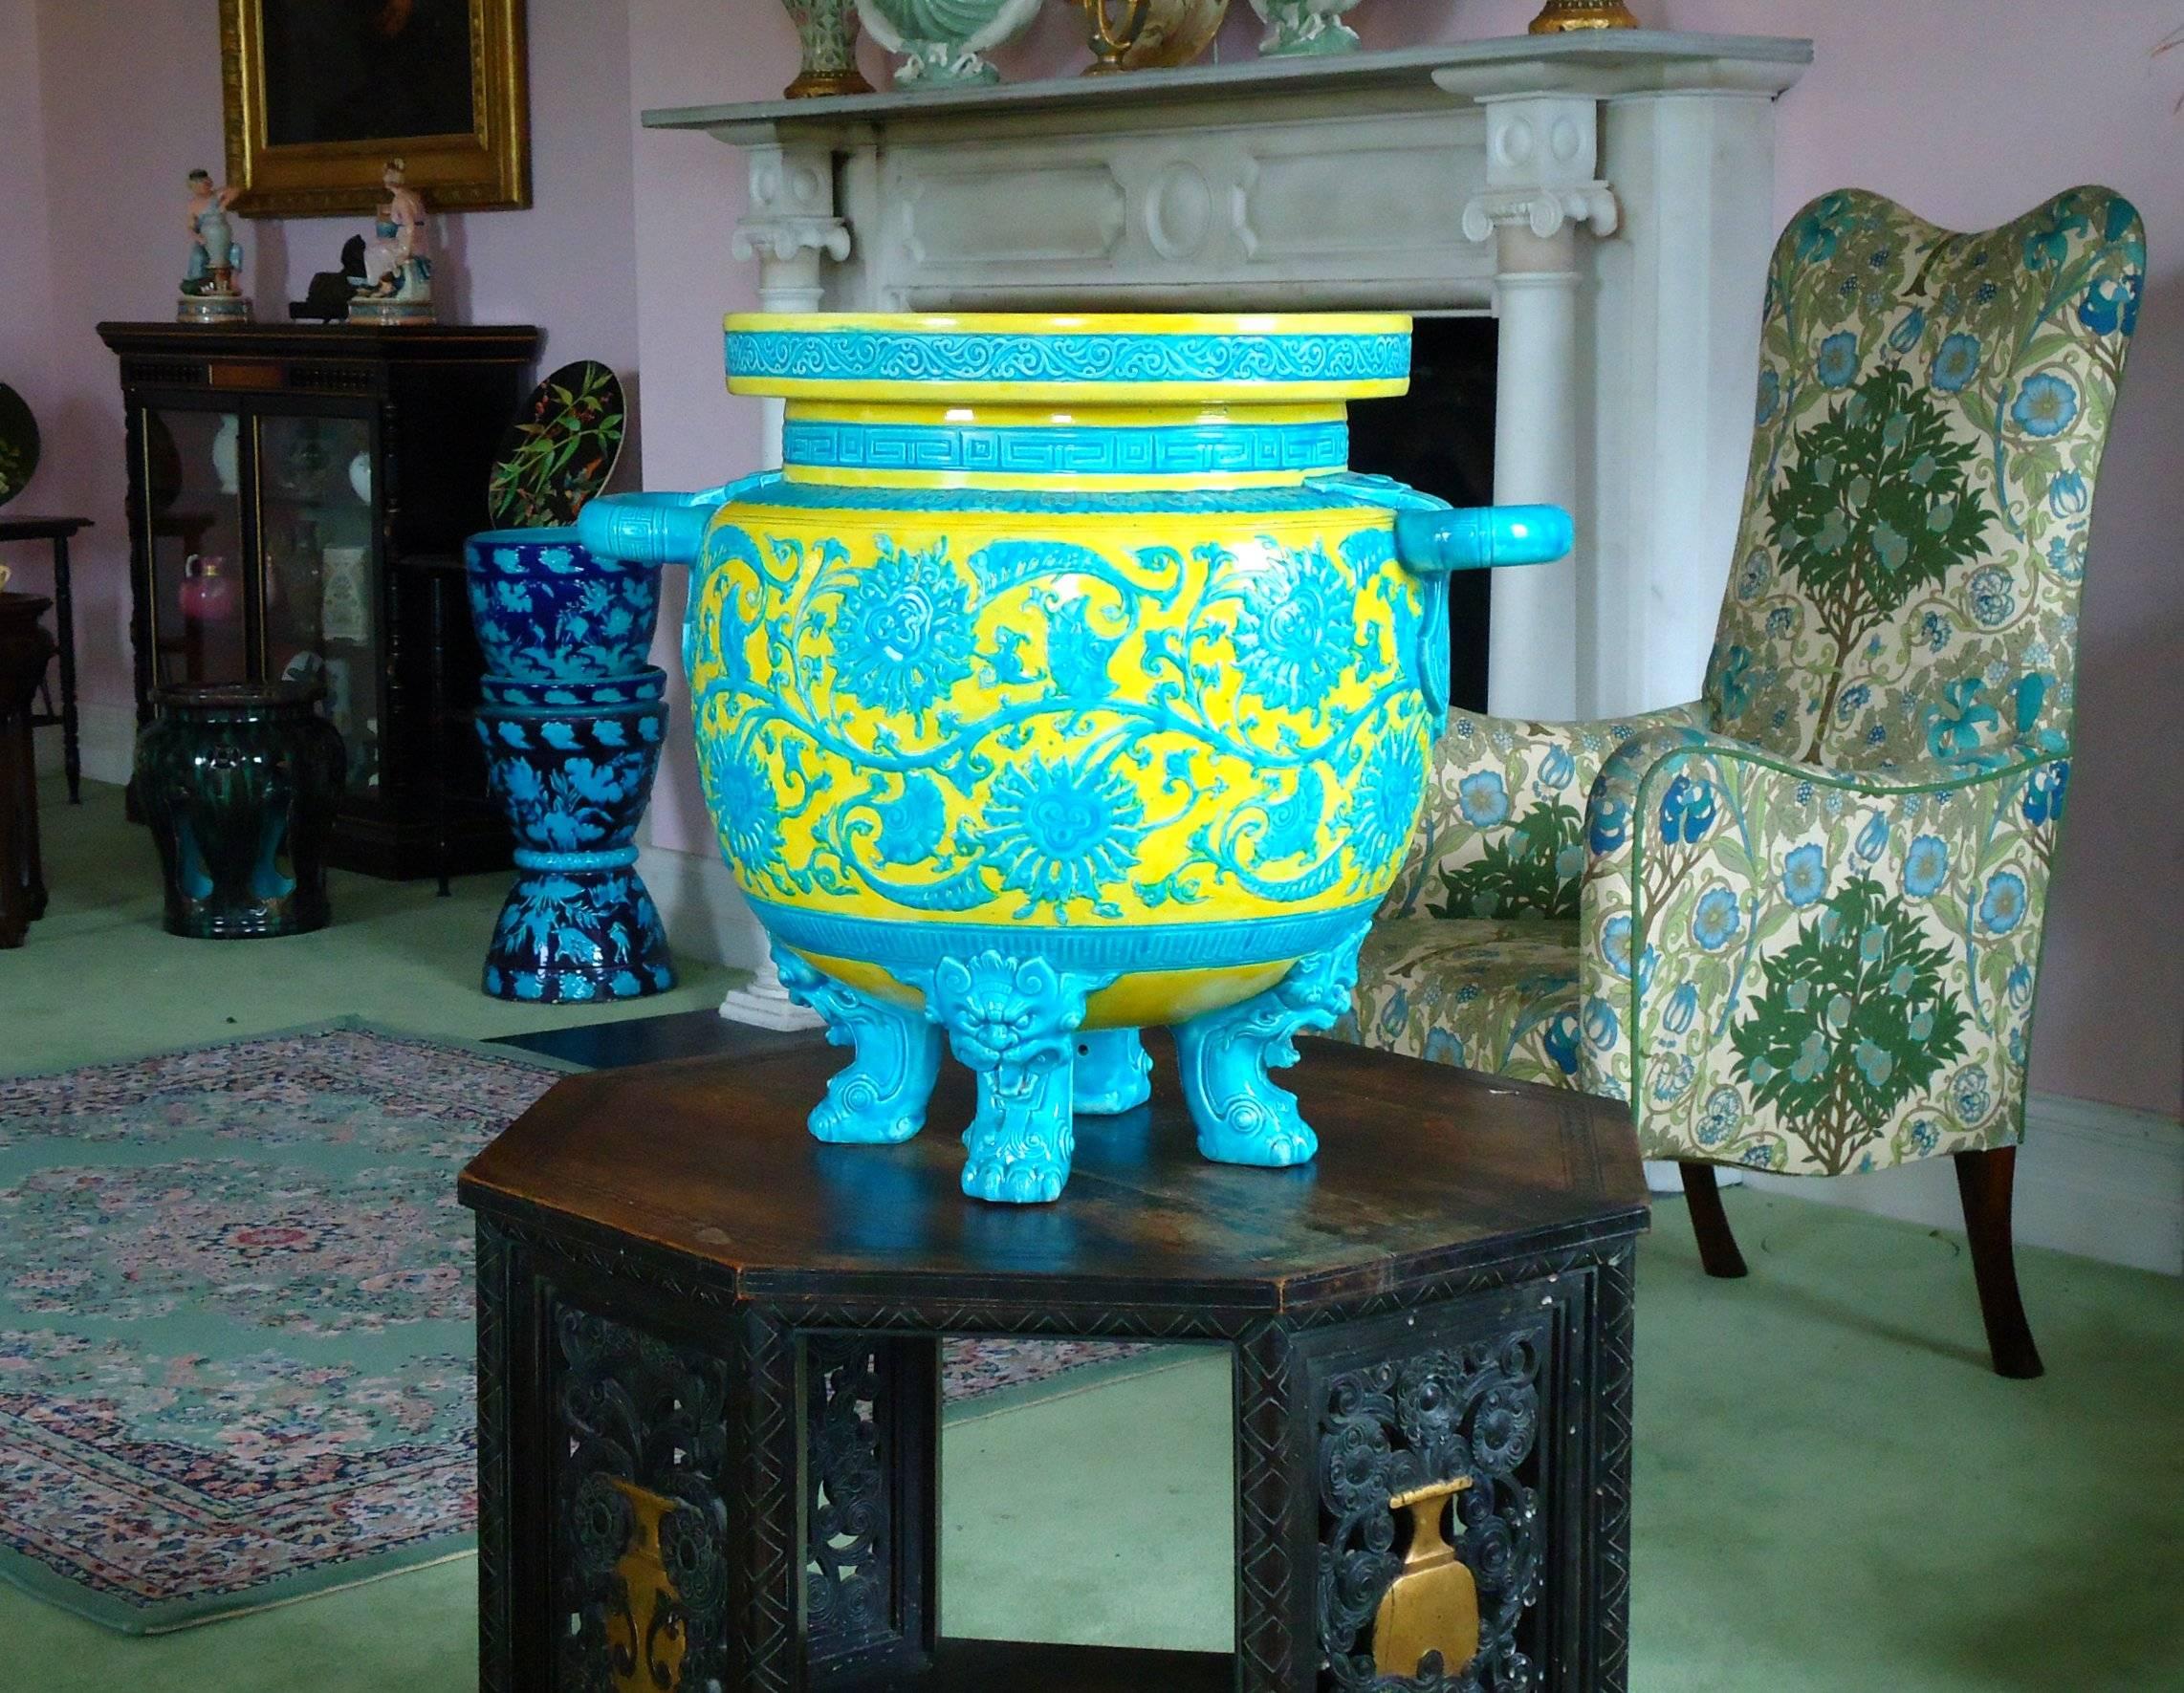 A rare Minton Majolica floor jardinière in the Chinese style decorated in imperial yellow and Persian blue glazes. Minton introduced these two new glazes at the Vienna Exhibition 1873 displaying a group of Oriental inspired vases and jardinieres.